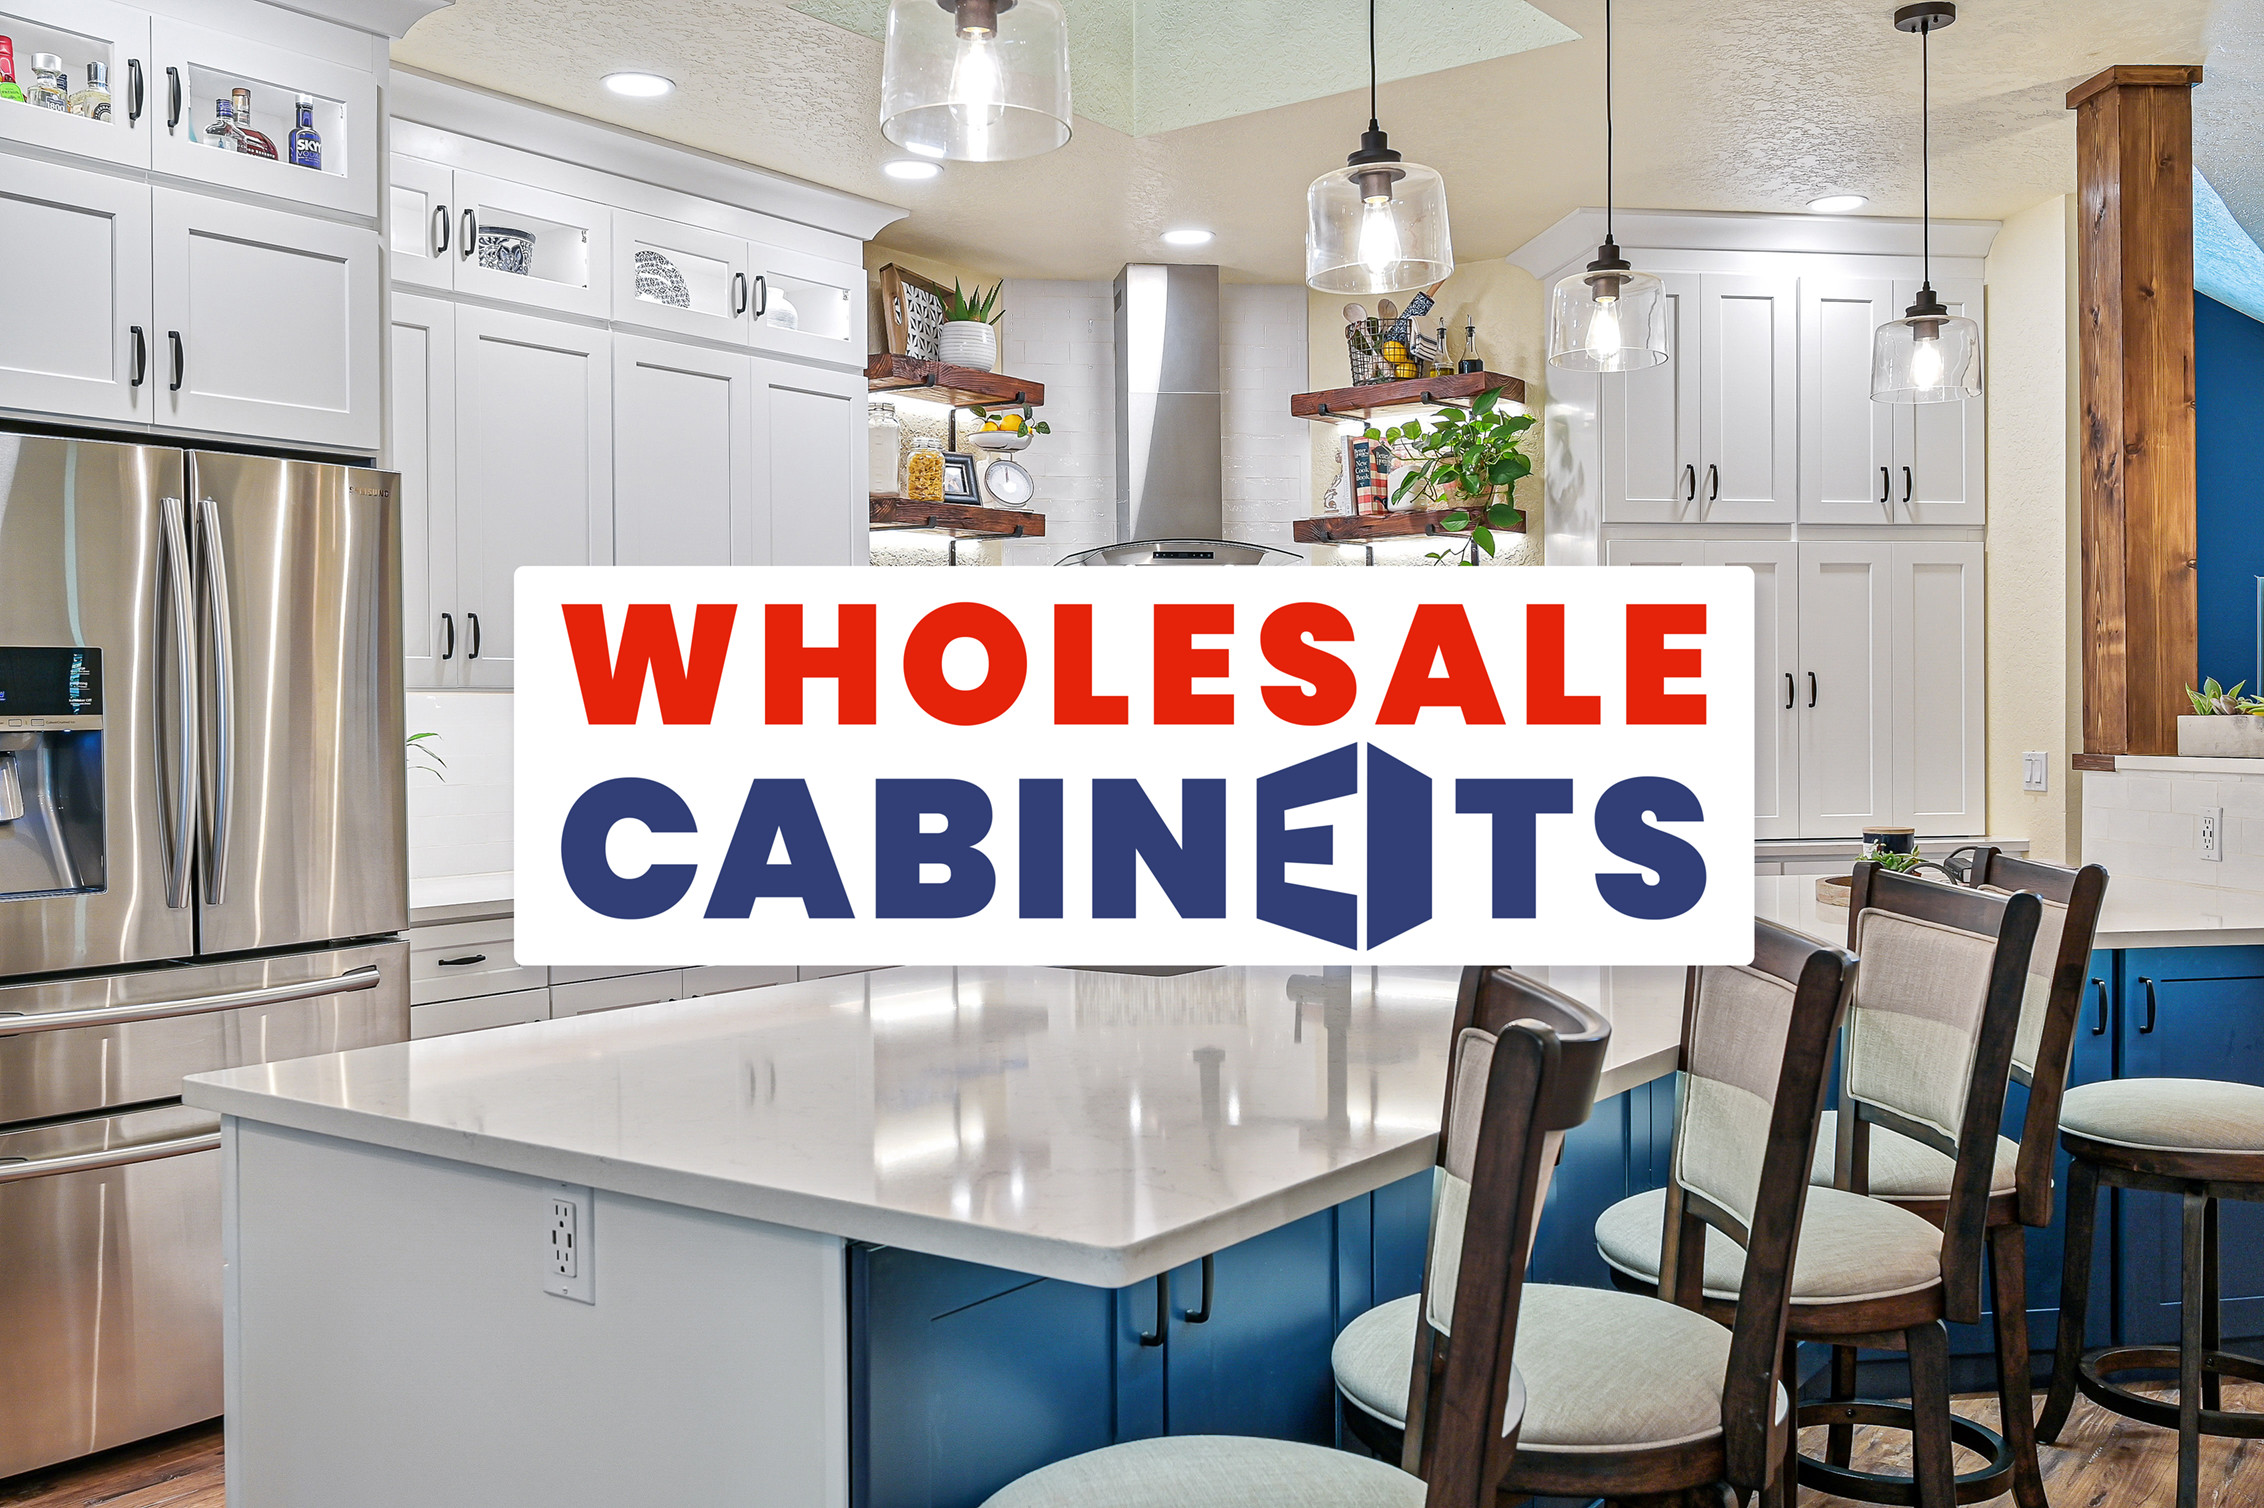 Dolphin Grey Shaker Cabinets | Shop online at Wholesale Cabinets